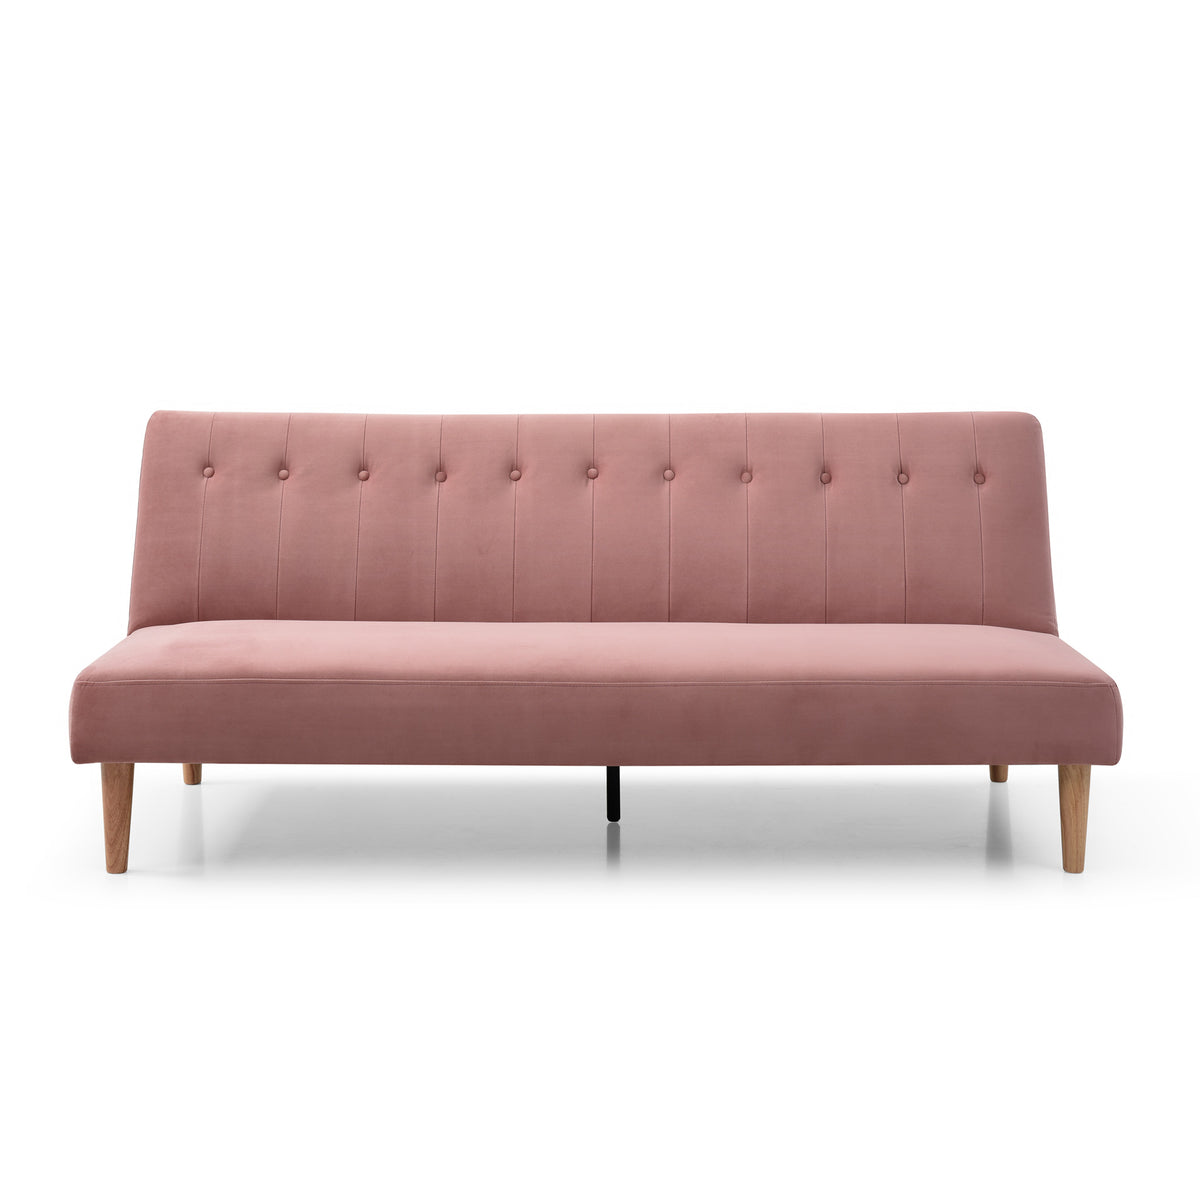 Shelby Dusty Pink Velvet Clik Clak Sofa Bed from Roseland furniture